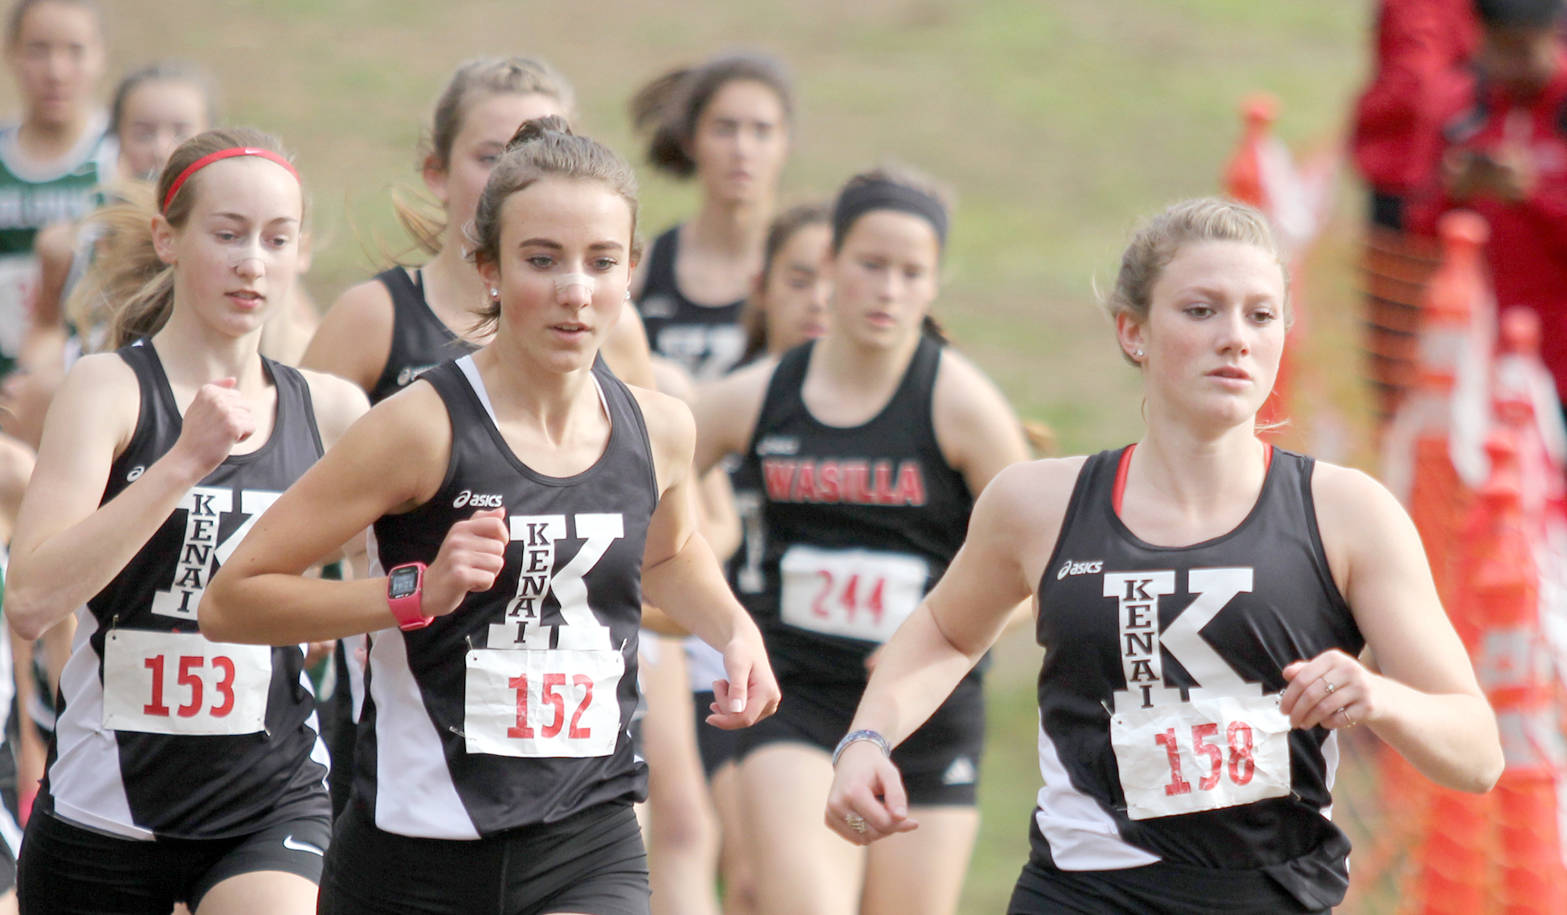 Kenai Central senior Addison Gibson leads a trio of Kards early in the varsity girls’ race of the Wasilla Invitational Saturday, Sept. 9, 2017, at the Government Peak Recreation Area near Palmer. Gibson finished second. From left are Jaycie Calvert, Brooke Satathite and Riana Boonstra. (Photo by Jeremiah Bartz/Frontiersman)